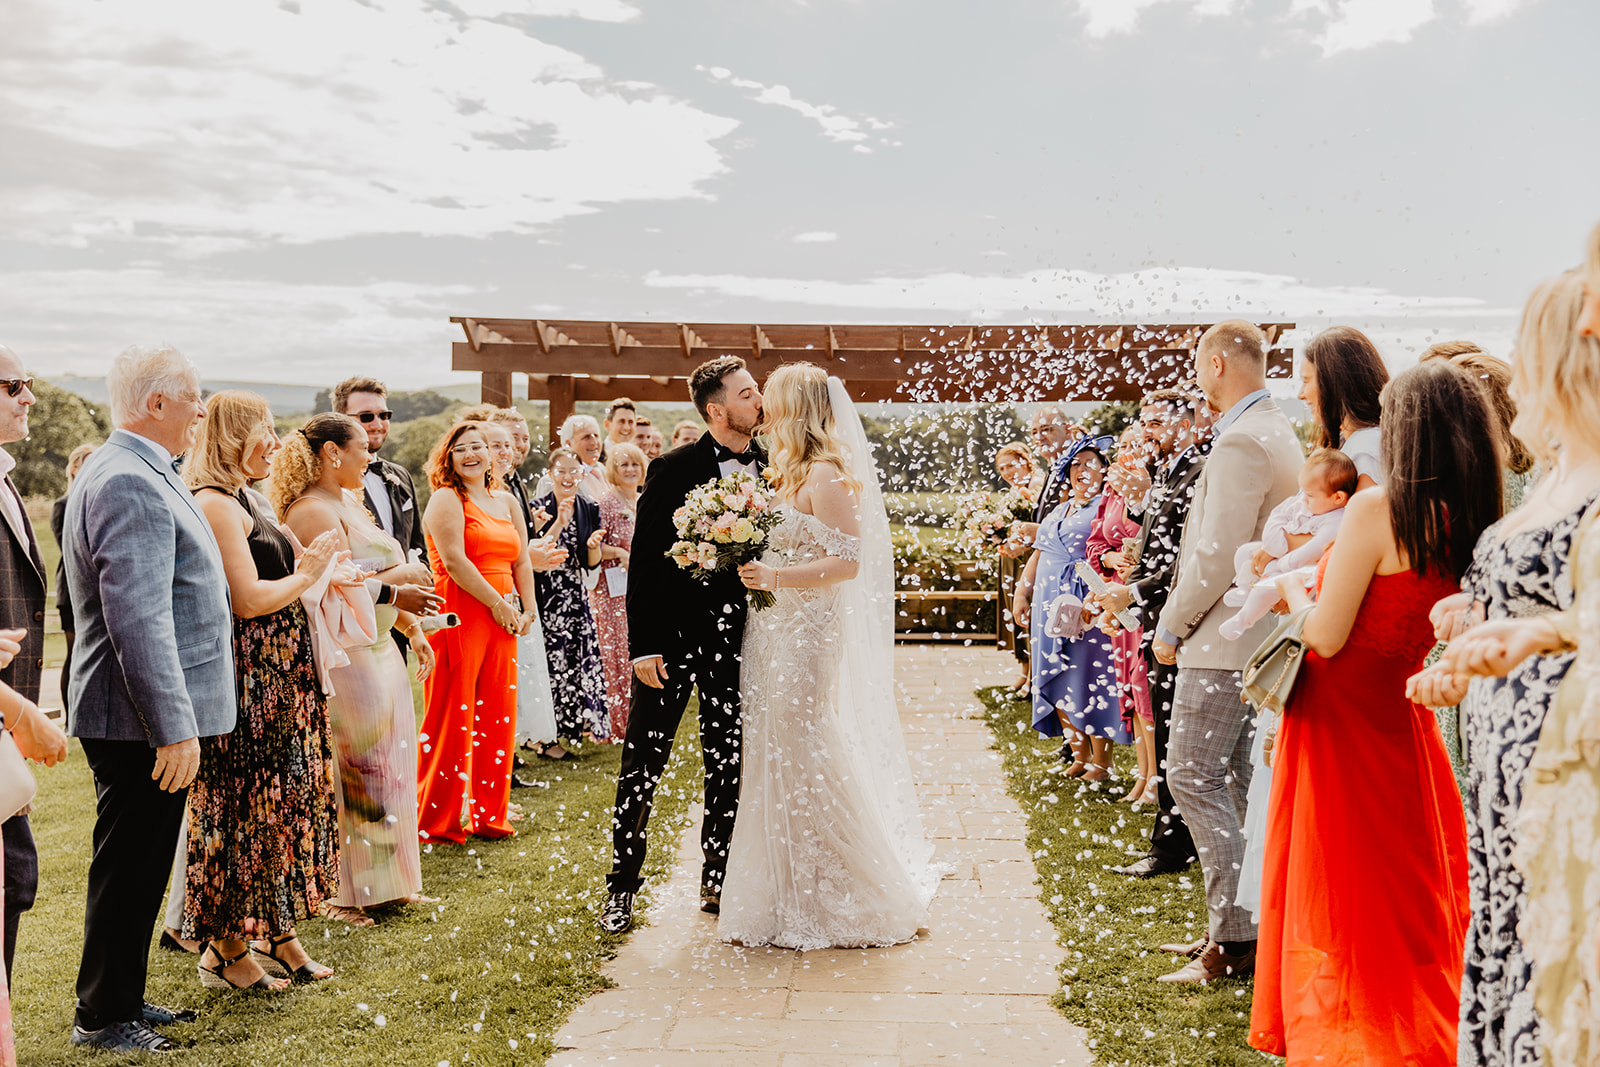 Bride and groom with confetti at a Southlands barn wedding, Sussex. Photo by OliveJoy Photography.